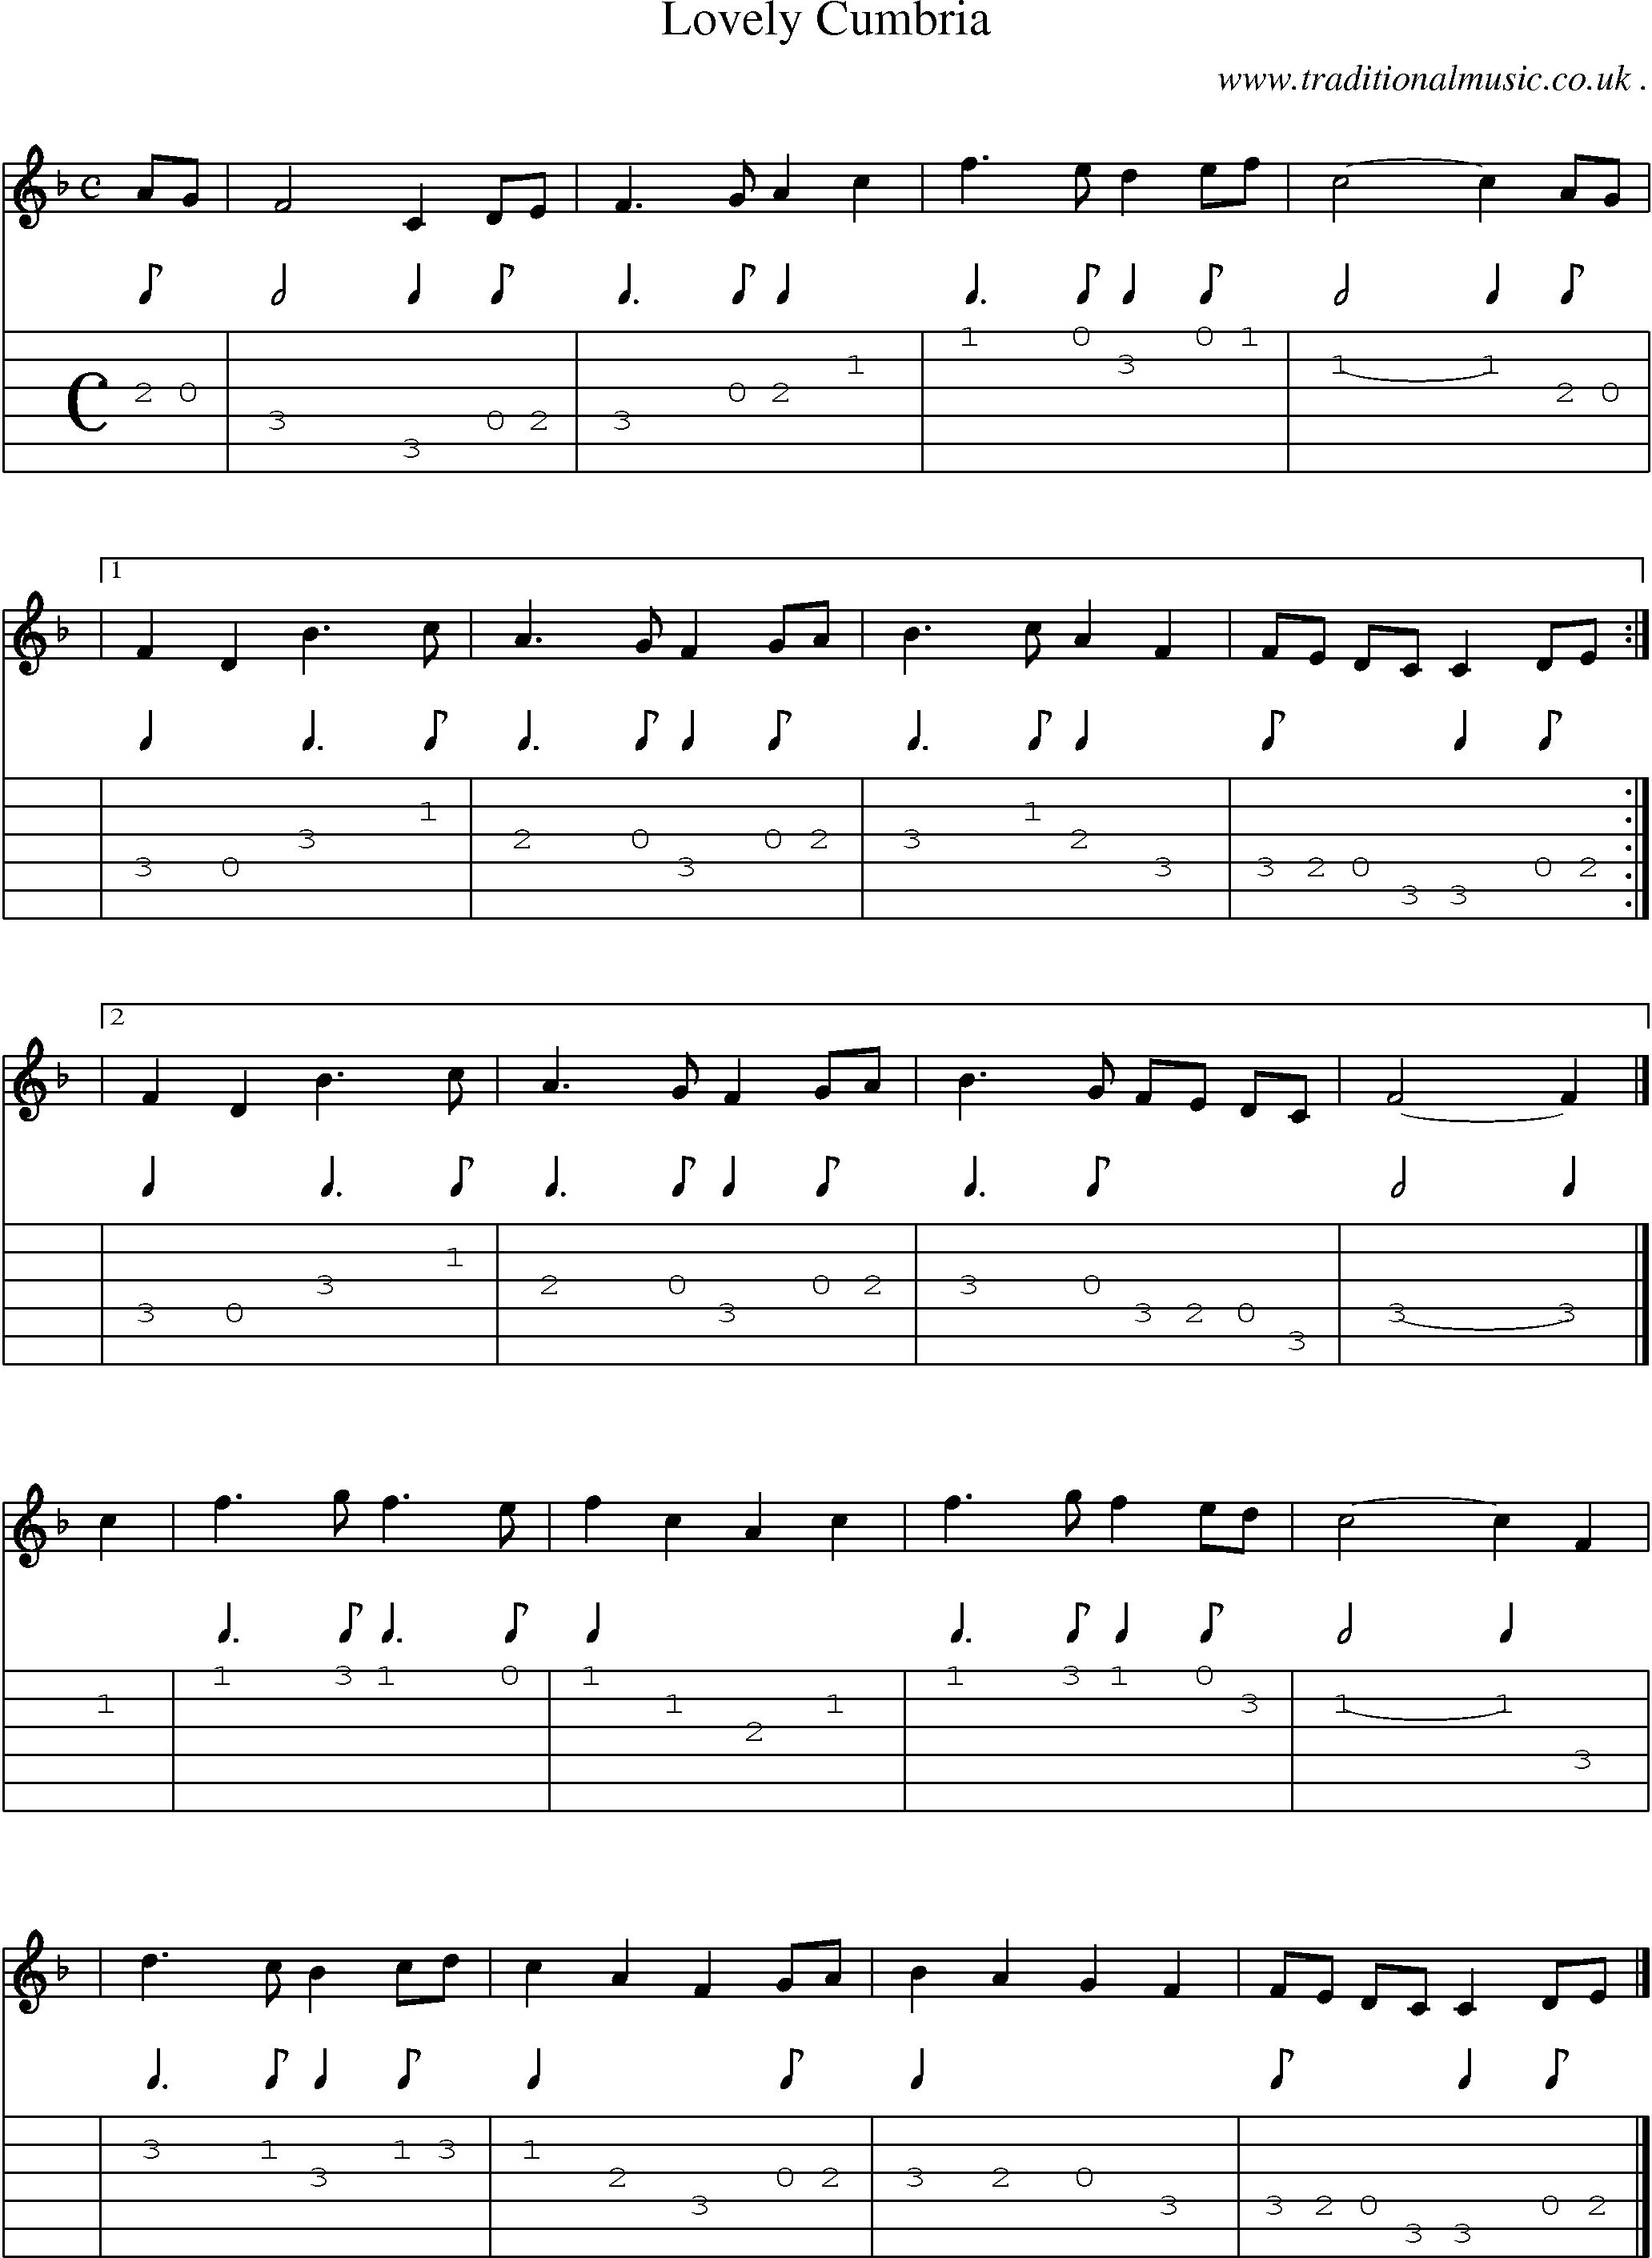 Sheet-music  score, Chords and Guitar Tabs for Lovely Cumbria